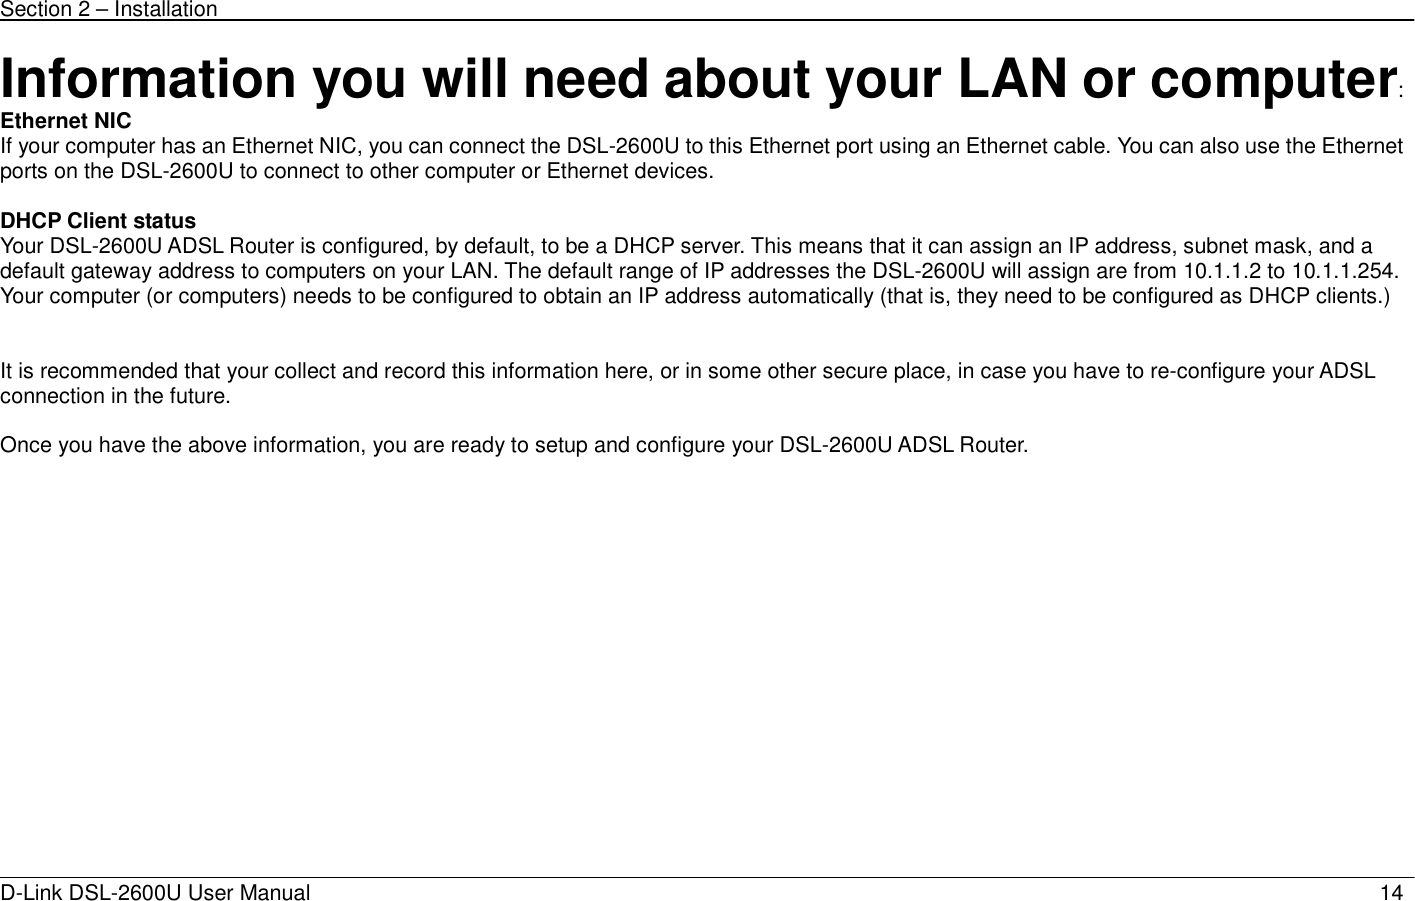 Section 2 – Installation   D-Link DSL-2600U User Manual                            14Information you will need about your LAN or computer: Ethernet NIC If your computer has an Ethernet NIC, you can connect the DSL-2600U to this Ethernet port using an Ethernet cable. You can also use the Ethernet ports on the DSL-2600U to connect to other computer or Ethernet devices.  DHCP Client status Your DSL-2600U ADSL Router is configured, by default, to be a DHCP server. This means that it can assign an IP address, subnet mask, and a default gateway address to computers on your LAN. The default range of IP addresses the DSL-2600U will assign are from 10.1.1.2 to 10.1.1.254. Your computer (or computers) needs to be configured to obtain an IP address automatically (that is, they need to be configured as DHCP clients.)    It is recommended that your collect and record this information here, or in some other secure place, in case you have to re-configure your ADSL connection in the future.  Once you have the above information, you are ready to setup and configure your DSL-2600U ADSL Router. 